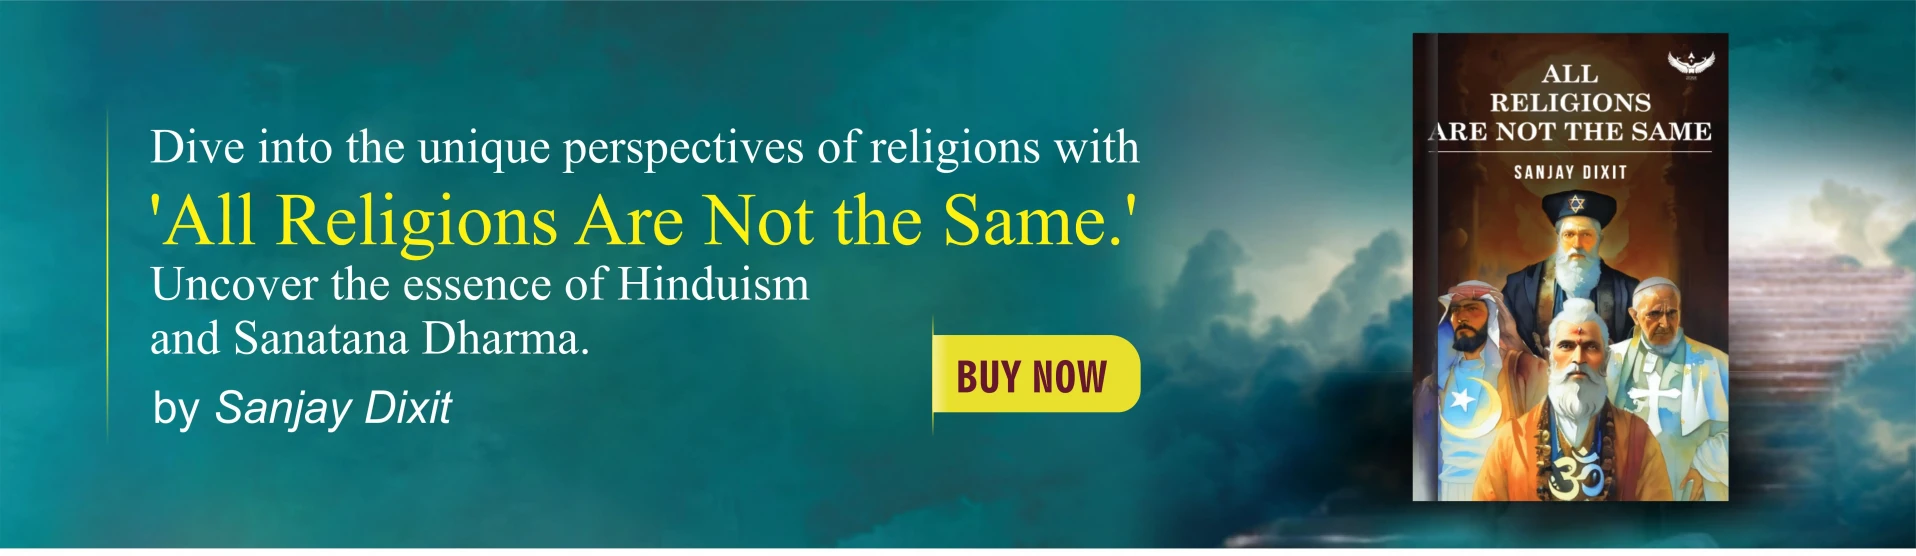 /all-religions-are-not-the-same